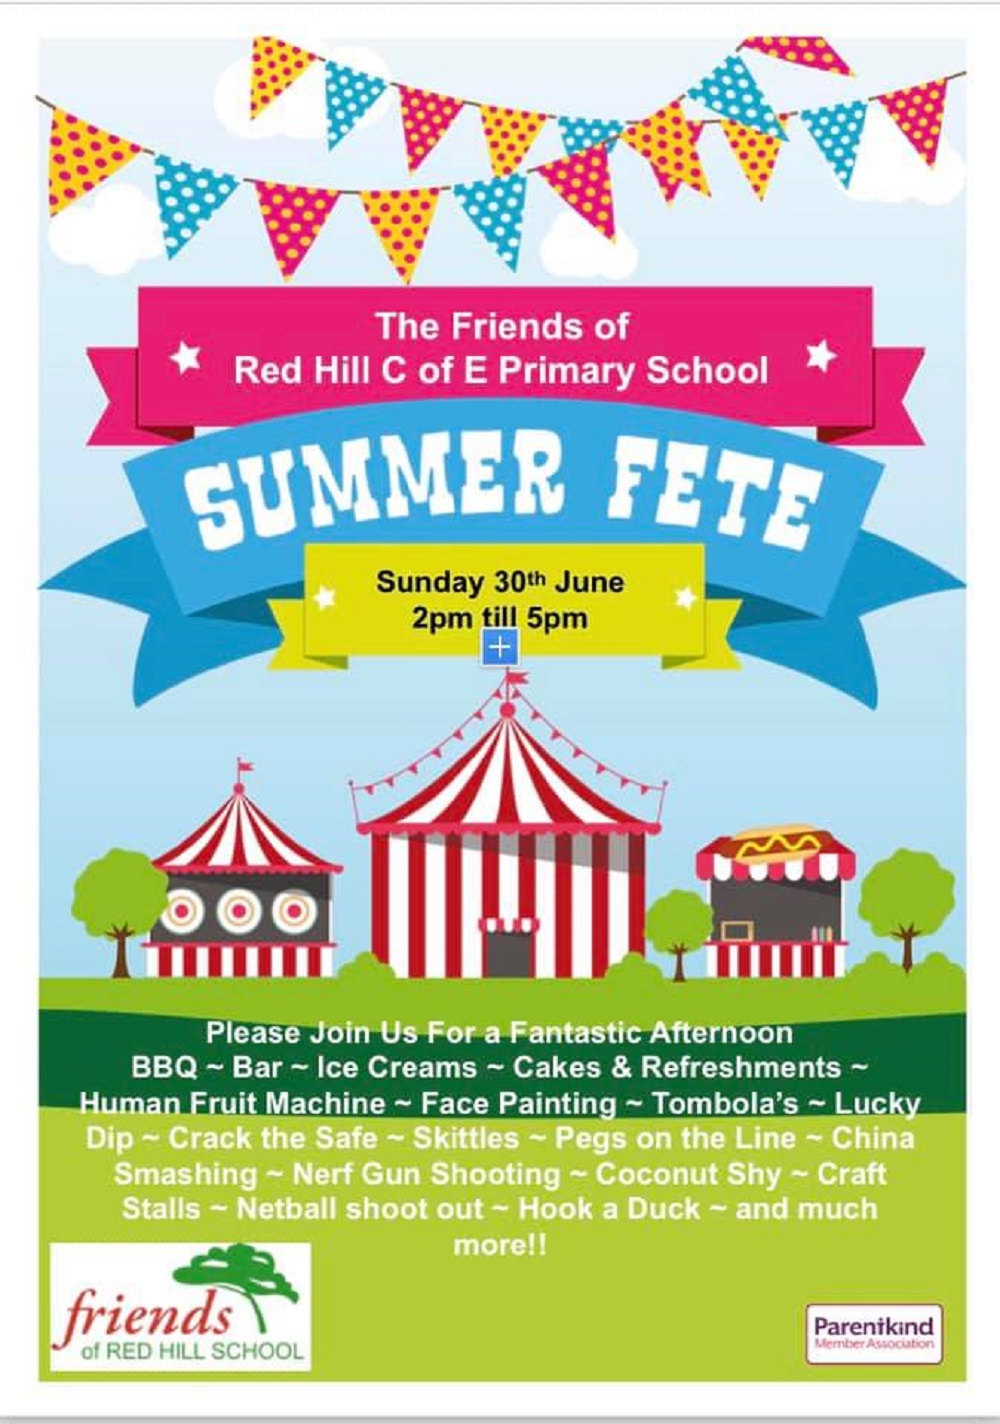 Friends of Red Hill C of E Primary School holding summer fete